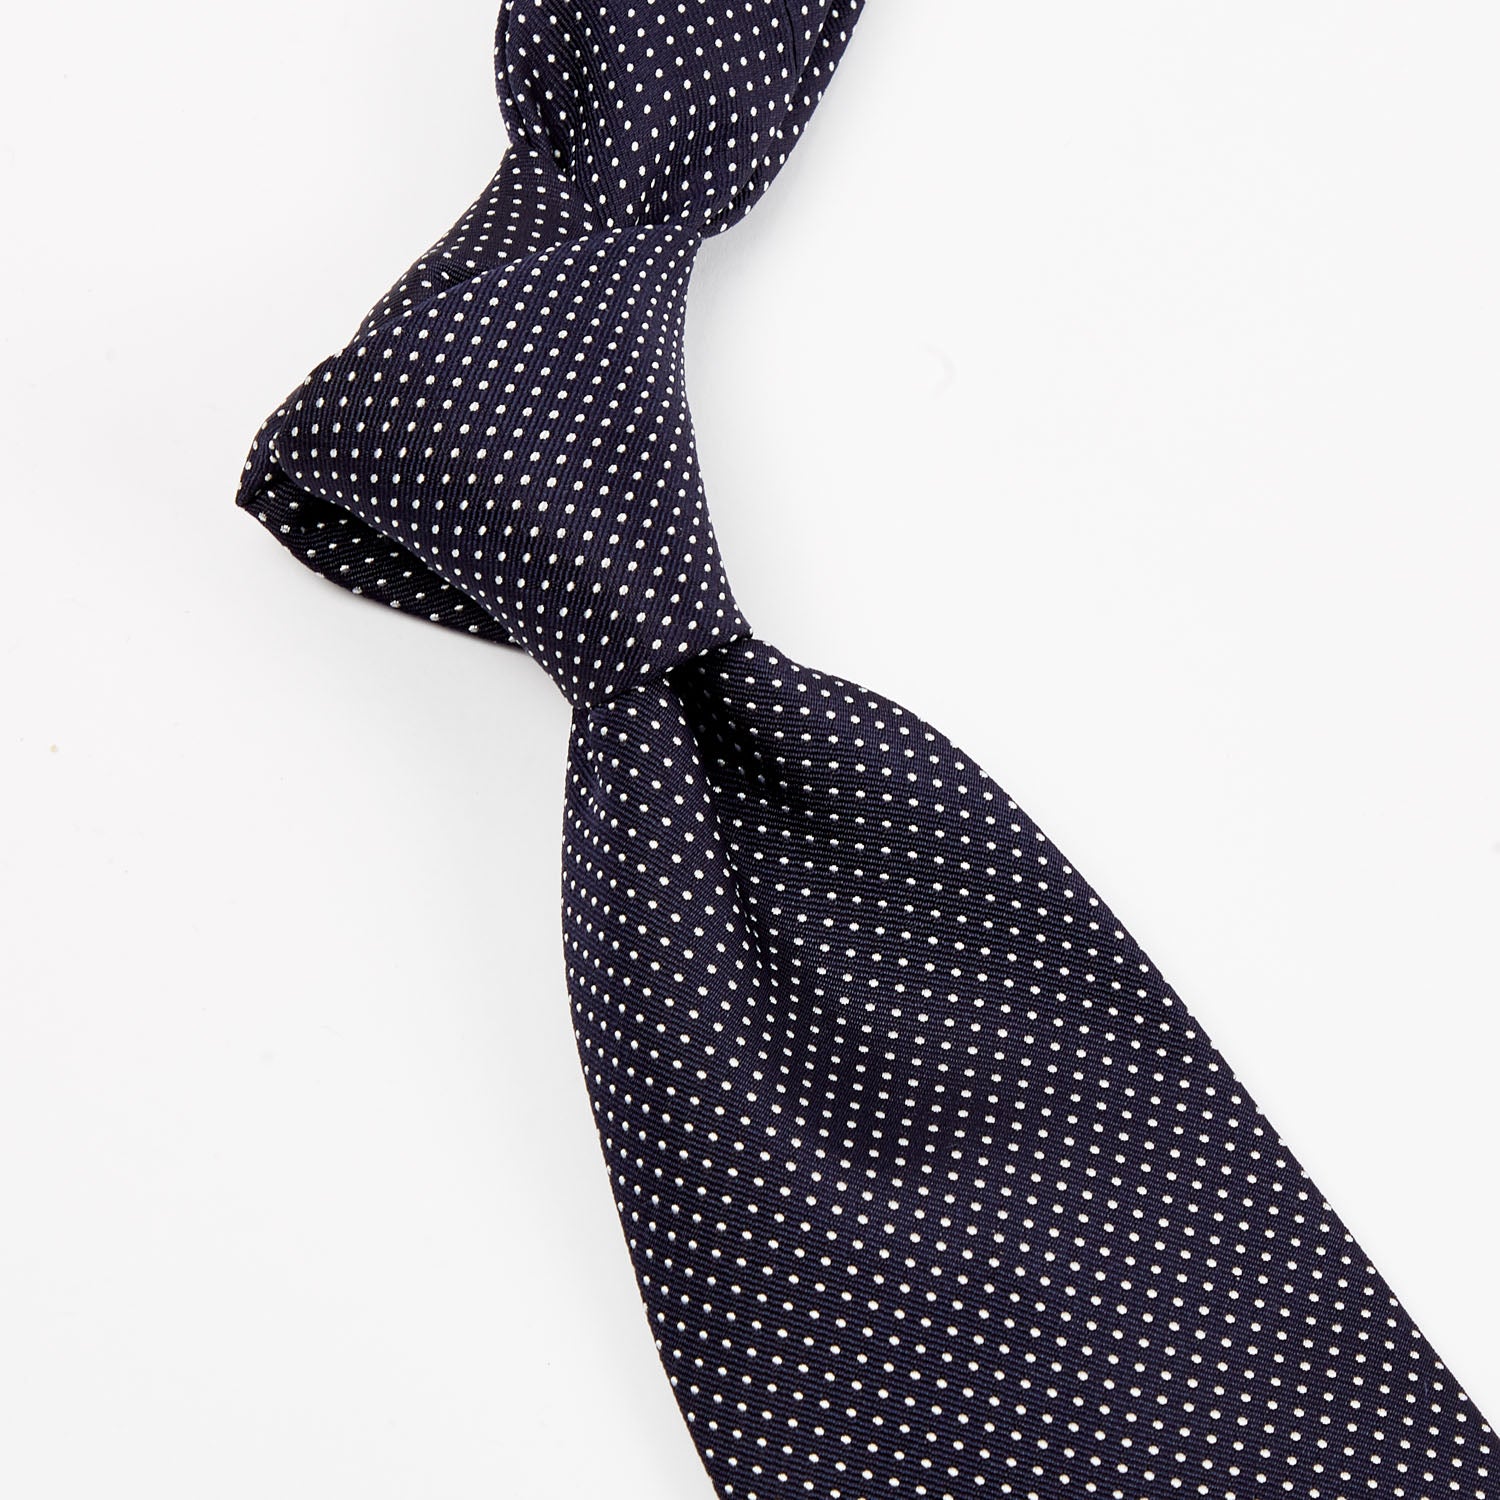 A Sovereign Grade Navy Silk Micro Dot Tie from KirbyAllison.com of quality.